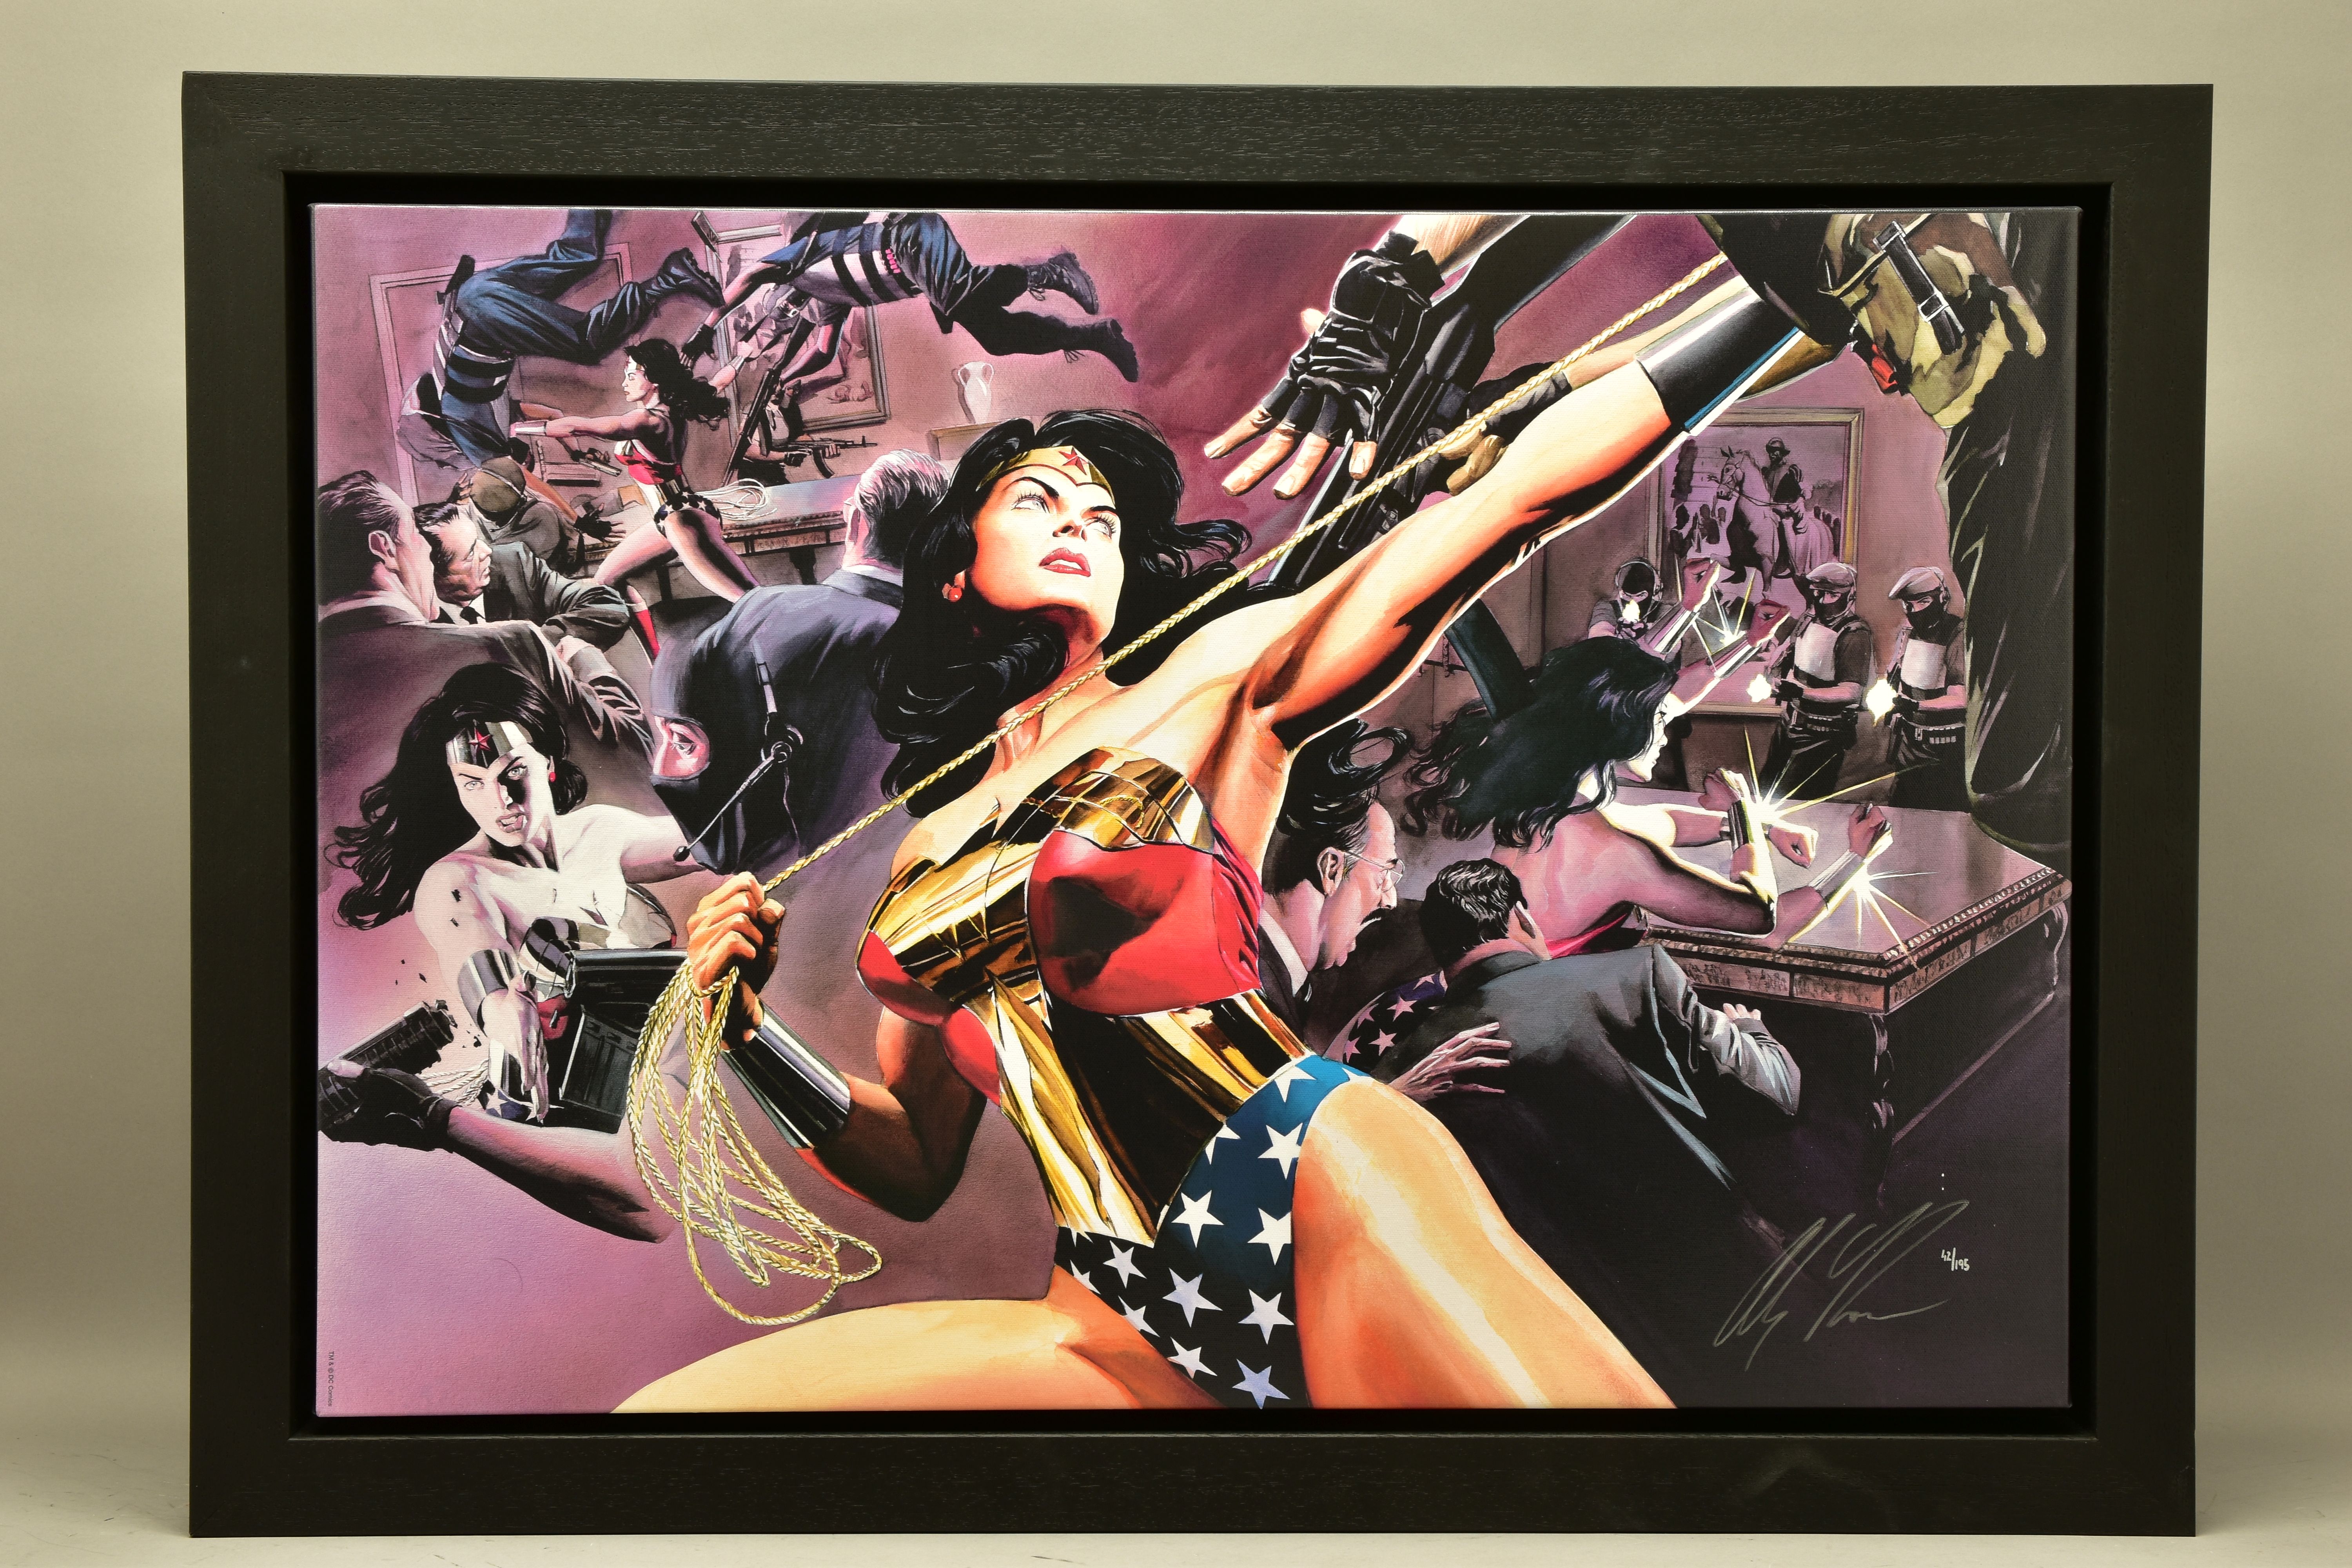 ALEX ROSS FOR DC COMICS, (AMERICAN CONTEMPORARY) 'WONDER WOMAN: DEFENDER OF TRUTH', a signed limited